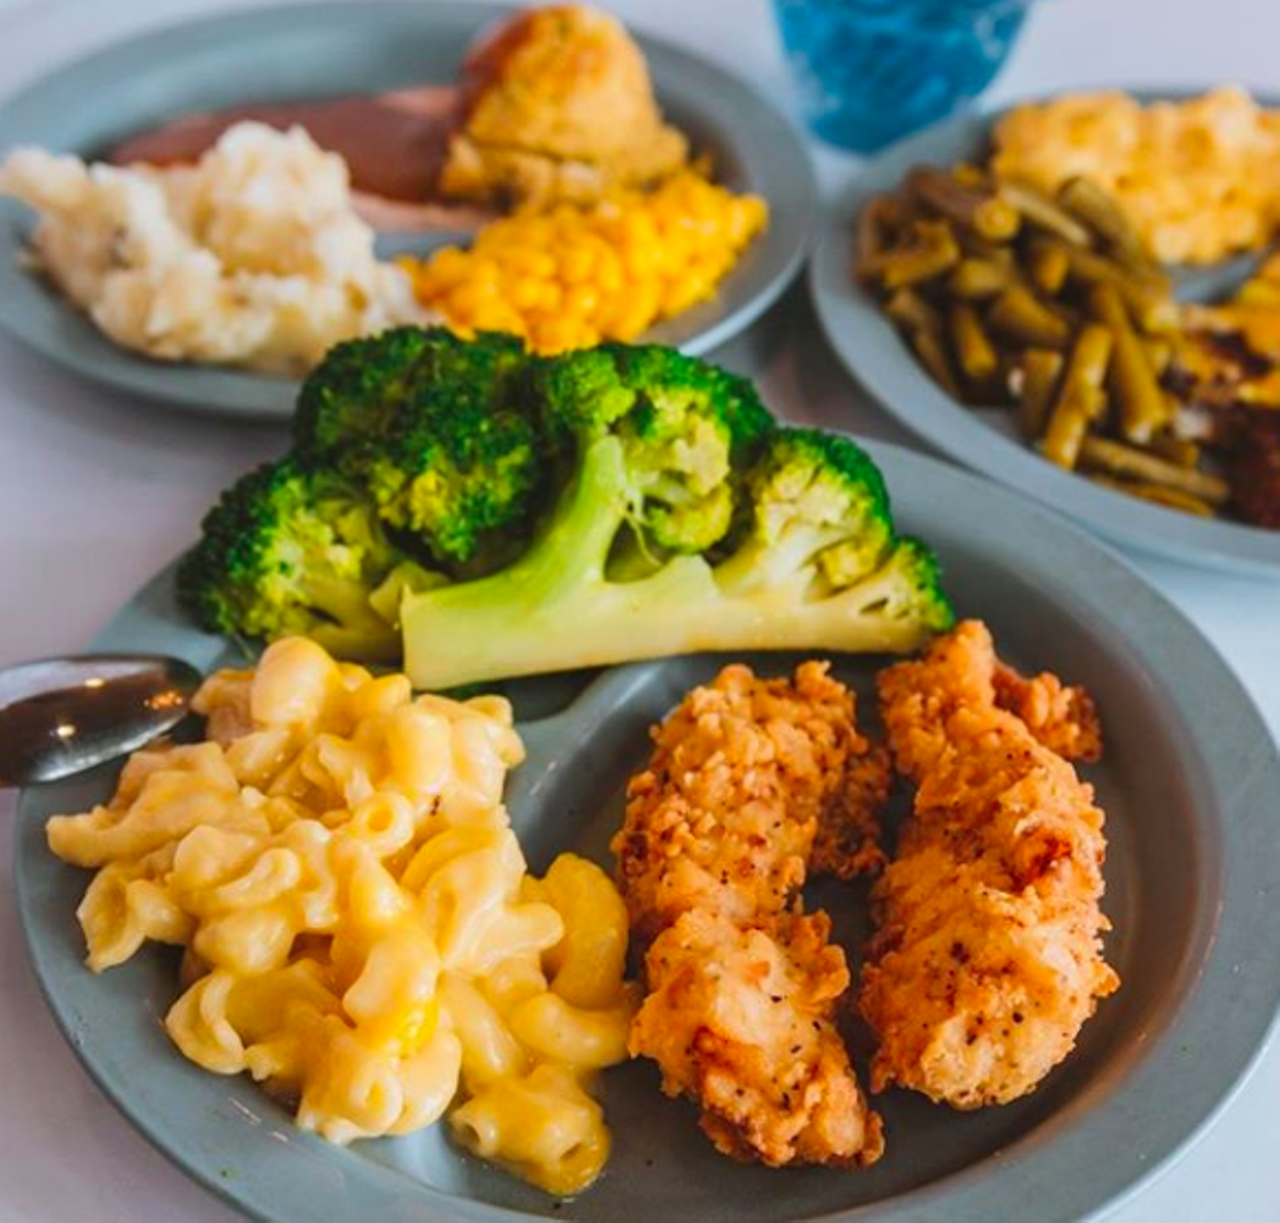 Luby’s
Multiple locations, lubys.com
At participating Luby’s locations, kids age 12 and under can eat free on Wednesdays and Saturdays. For every adult entree purchased, just as many kids can dine for free.
Photo via Instagram / lubys